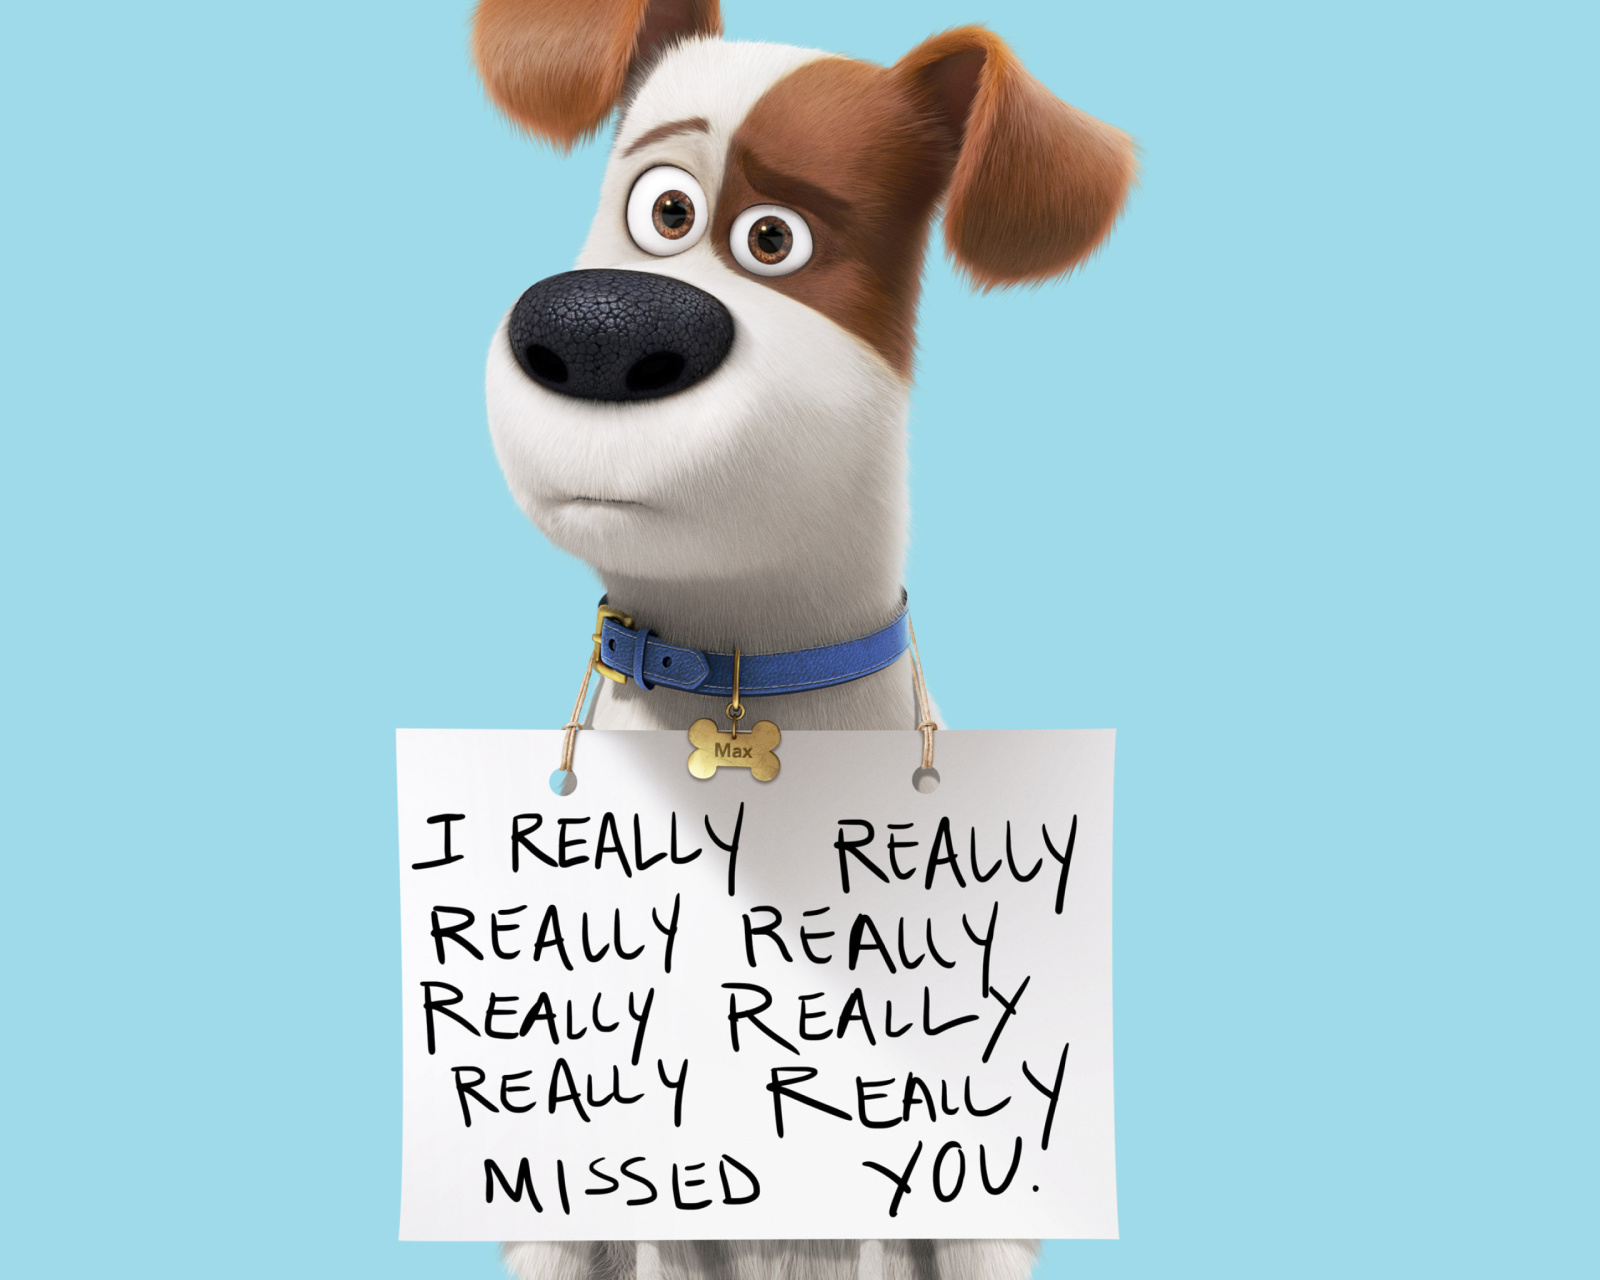 Das Max from The Secret Life of Pets Wallpaper 1600x1280